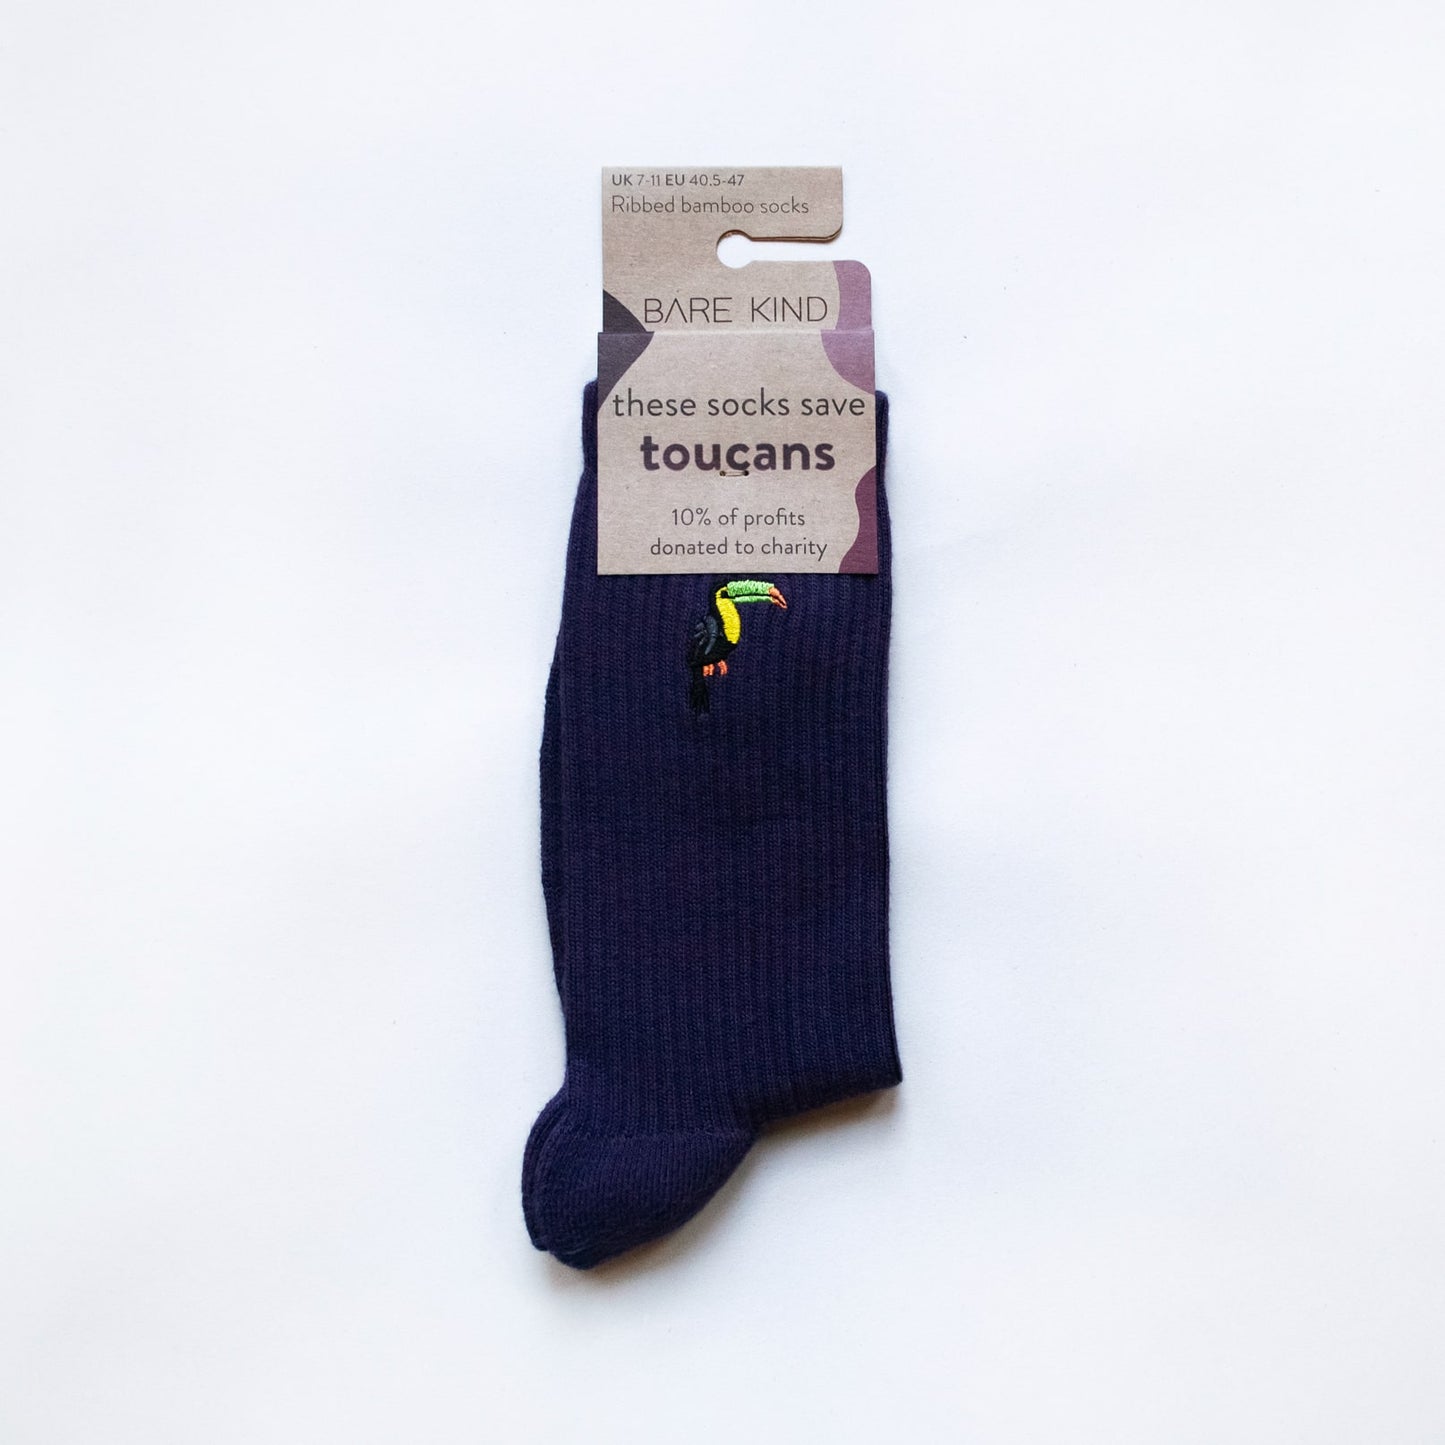  Save the Toucans | Luxury Ribbed Bamboo Socks - in packaging